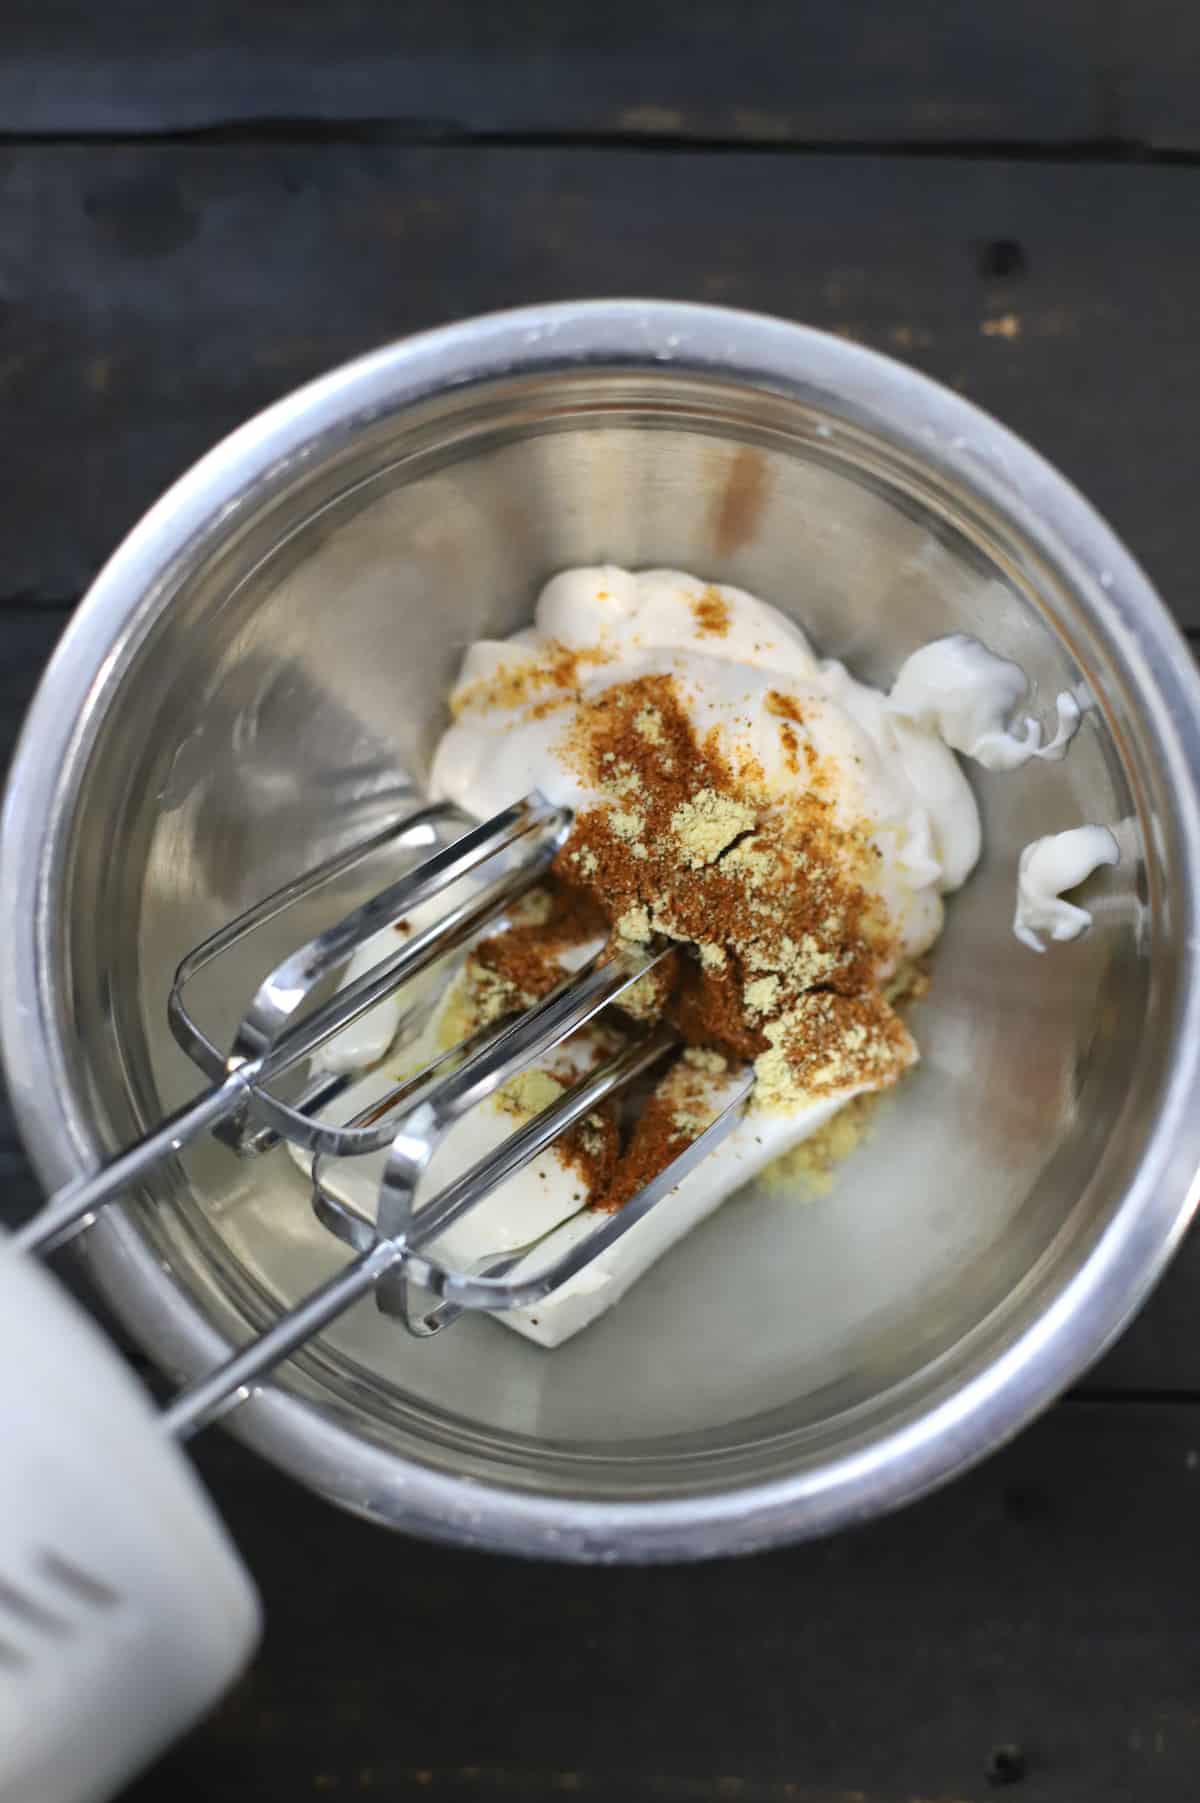 Cream cheese, mayo, and spices in a stainless bowl with a mixer.